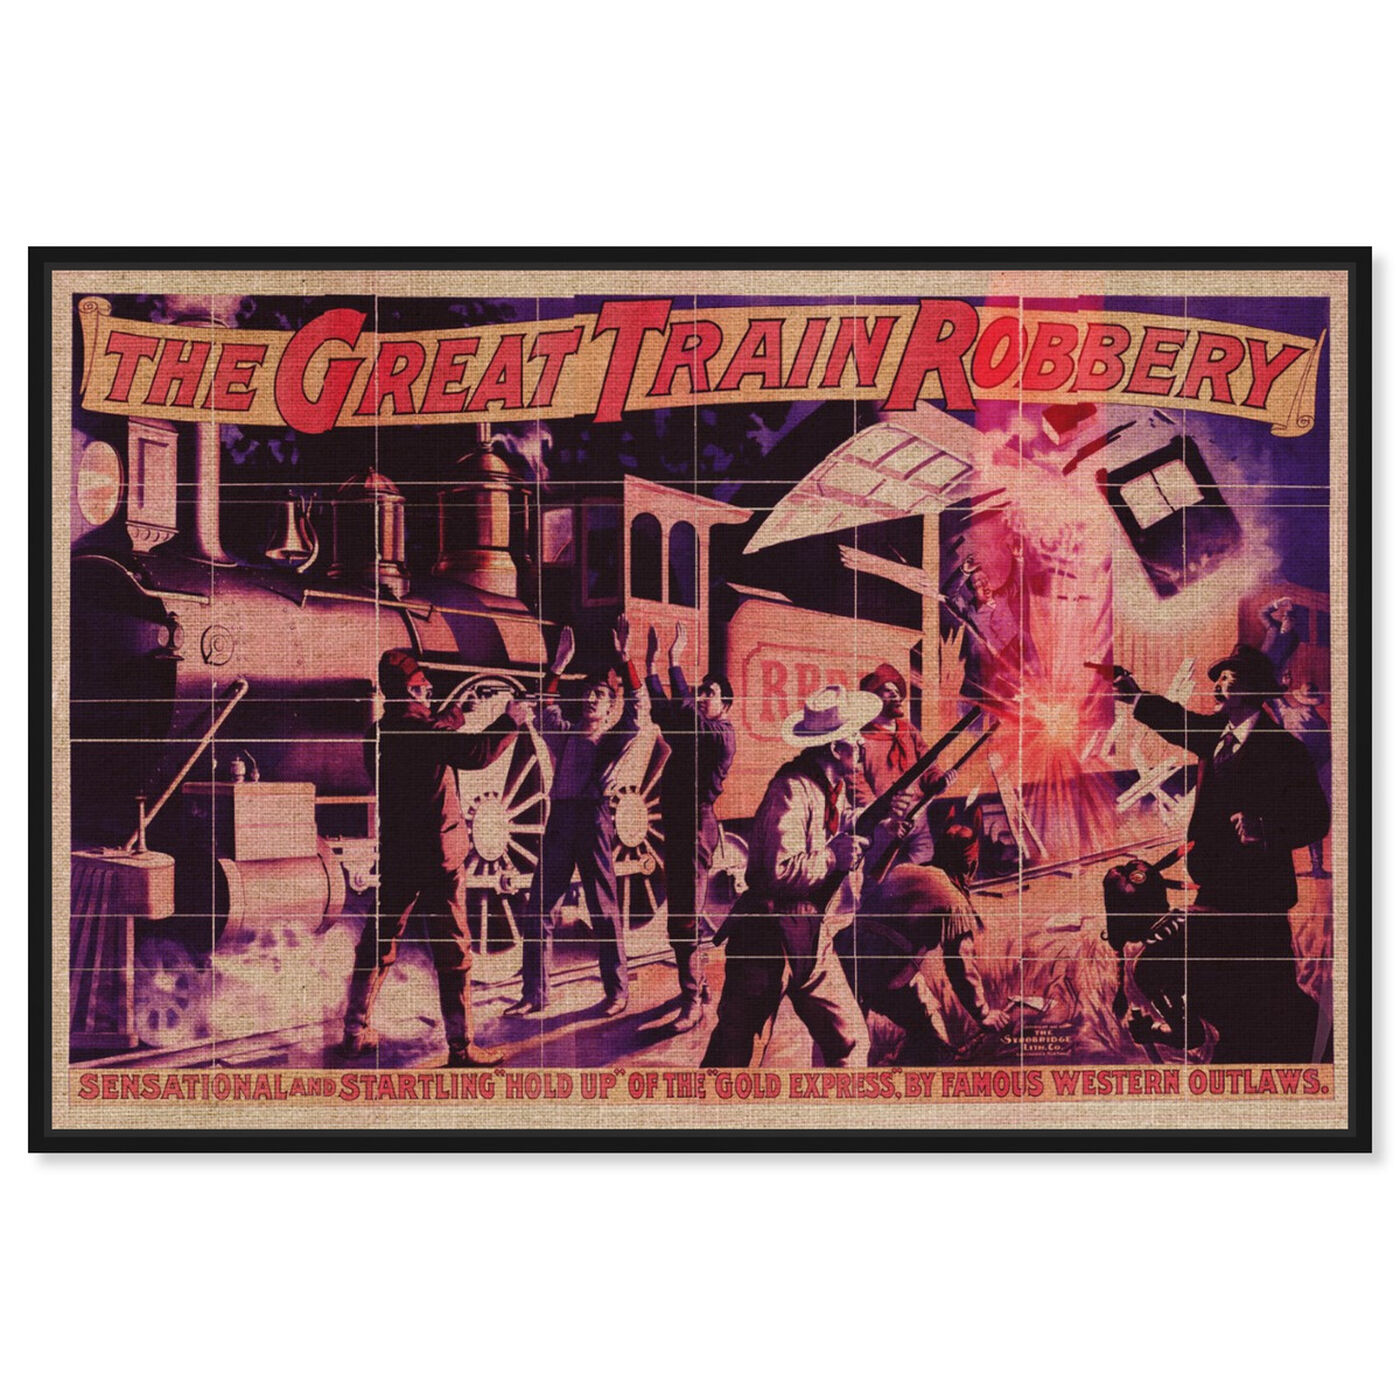 Front view of Great Train Robbery featuring advertising and posters art.